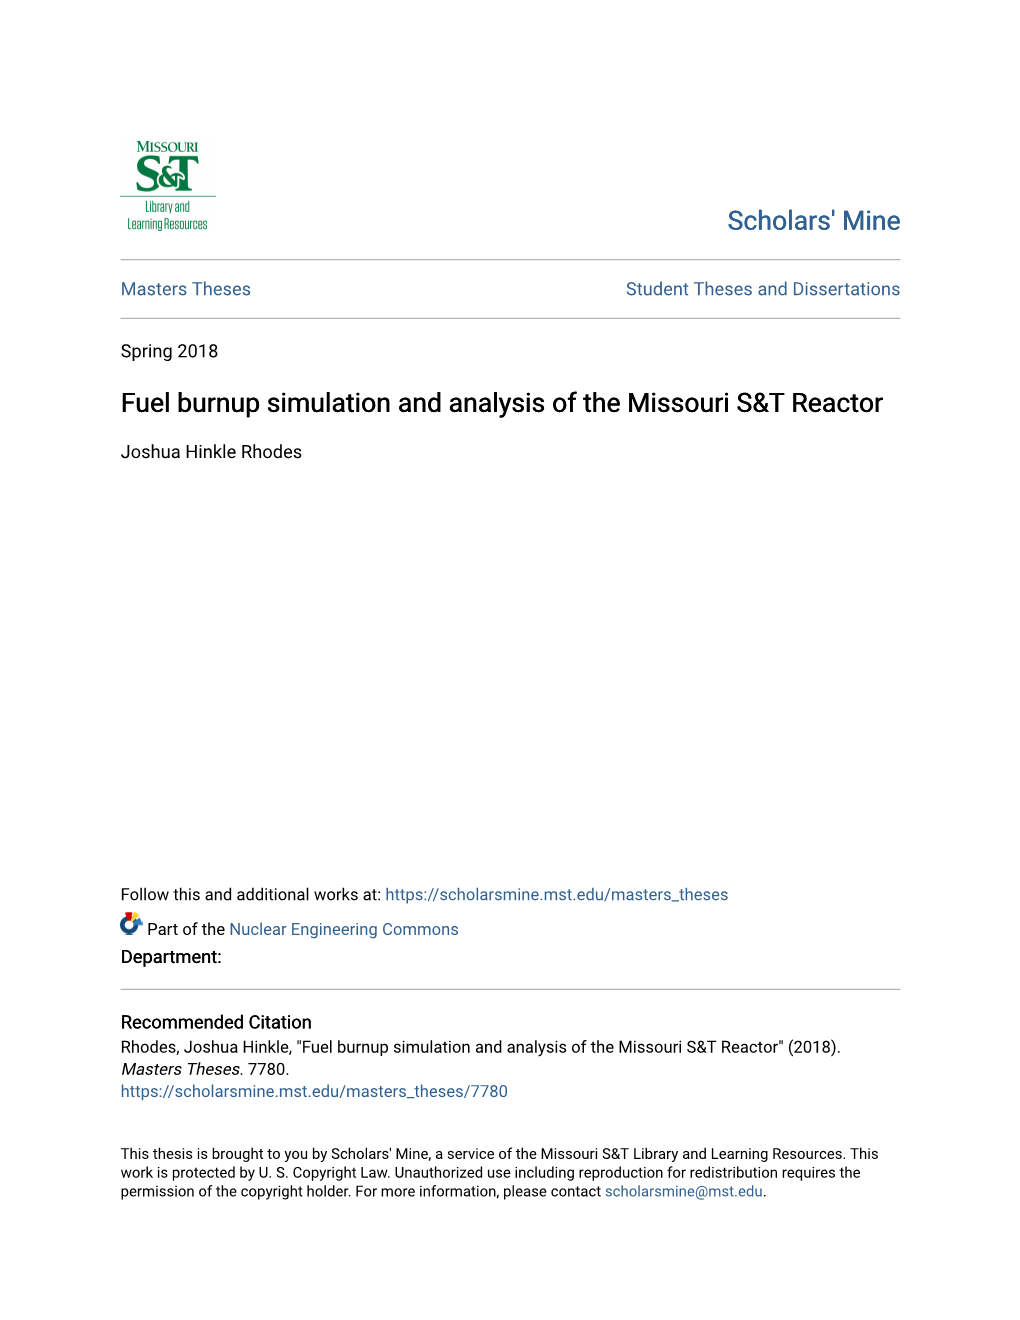 Fuel Burnup Simulation and Analysis of the Missouri S&T Reactor